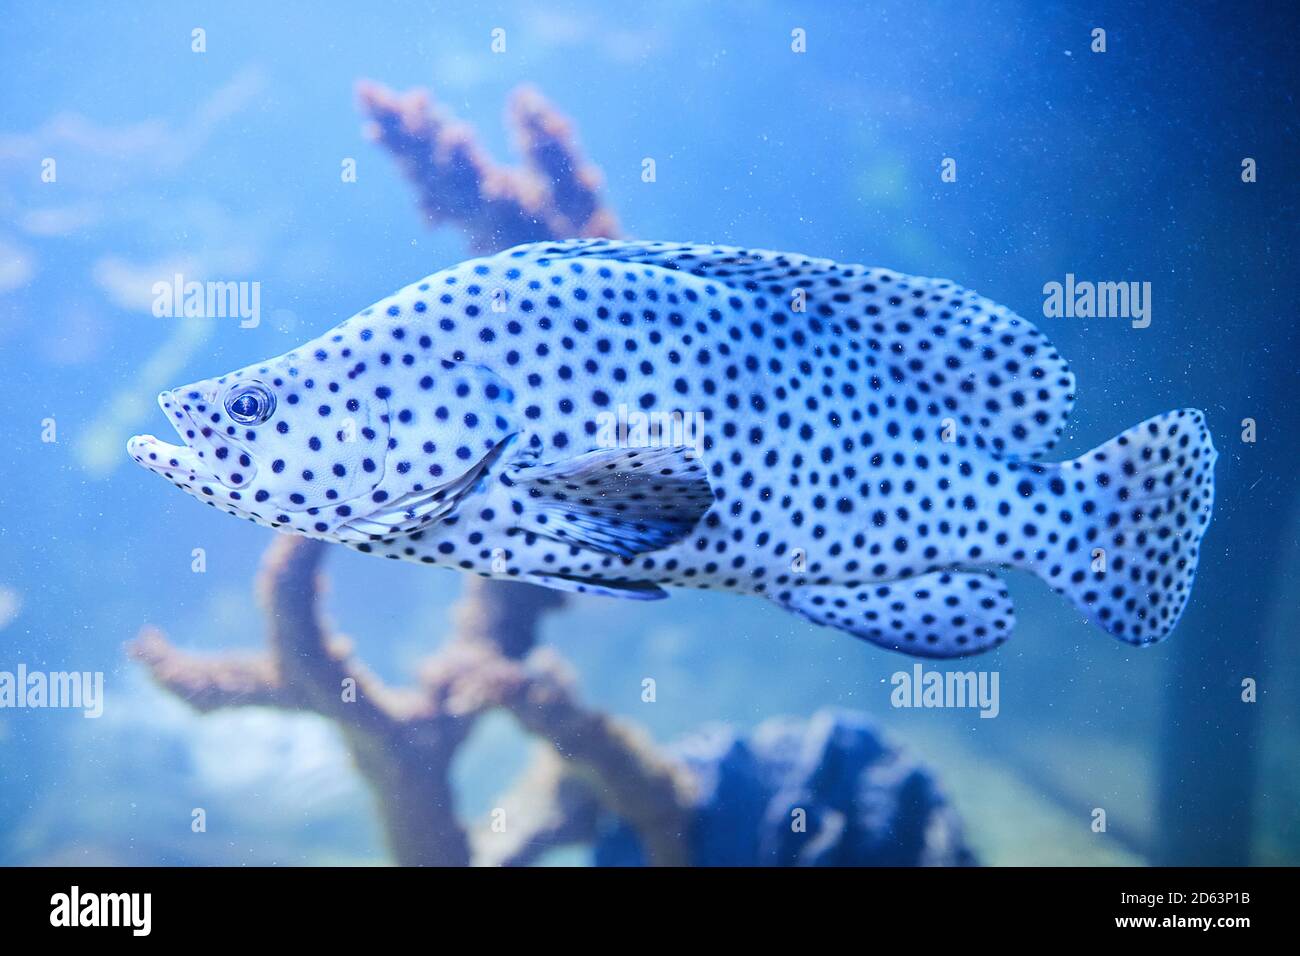 A spotted leopard fish Cromileptes altivelis swims in blue water at aquarium. Underwater image Stock Photo